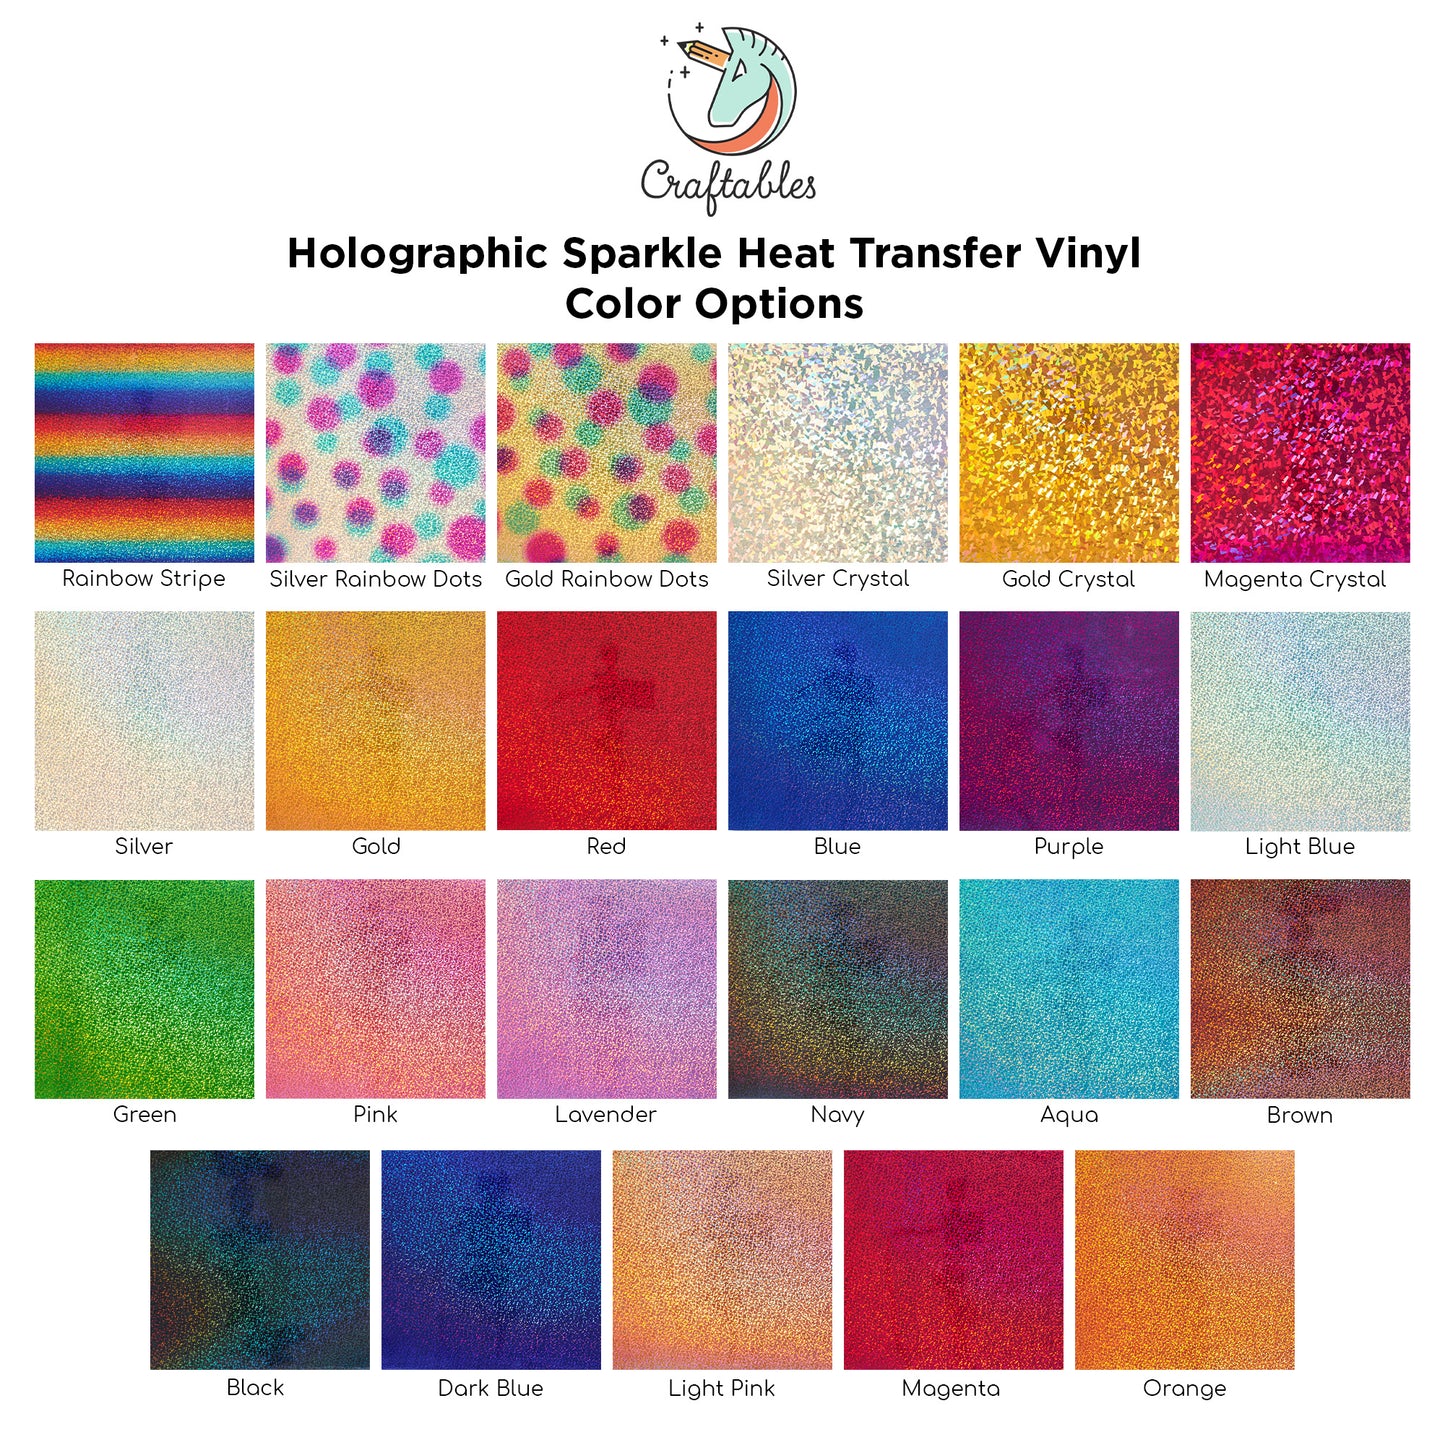 Blue Holographic Sparkle Heat Transfer Vinyl Rolls By Craftables